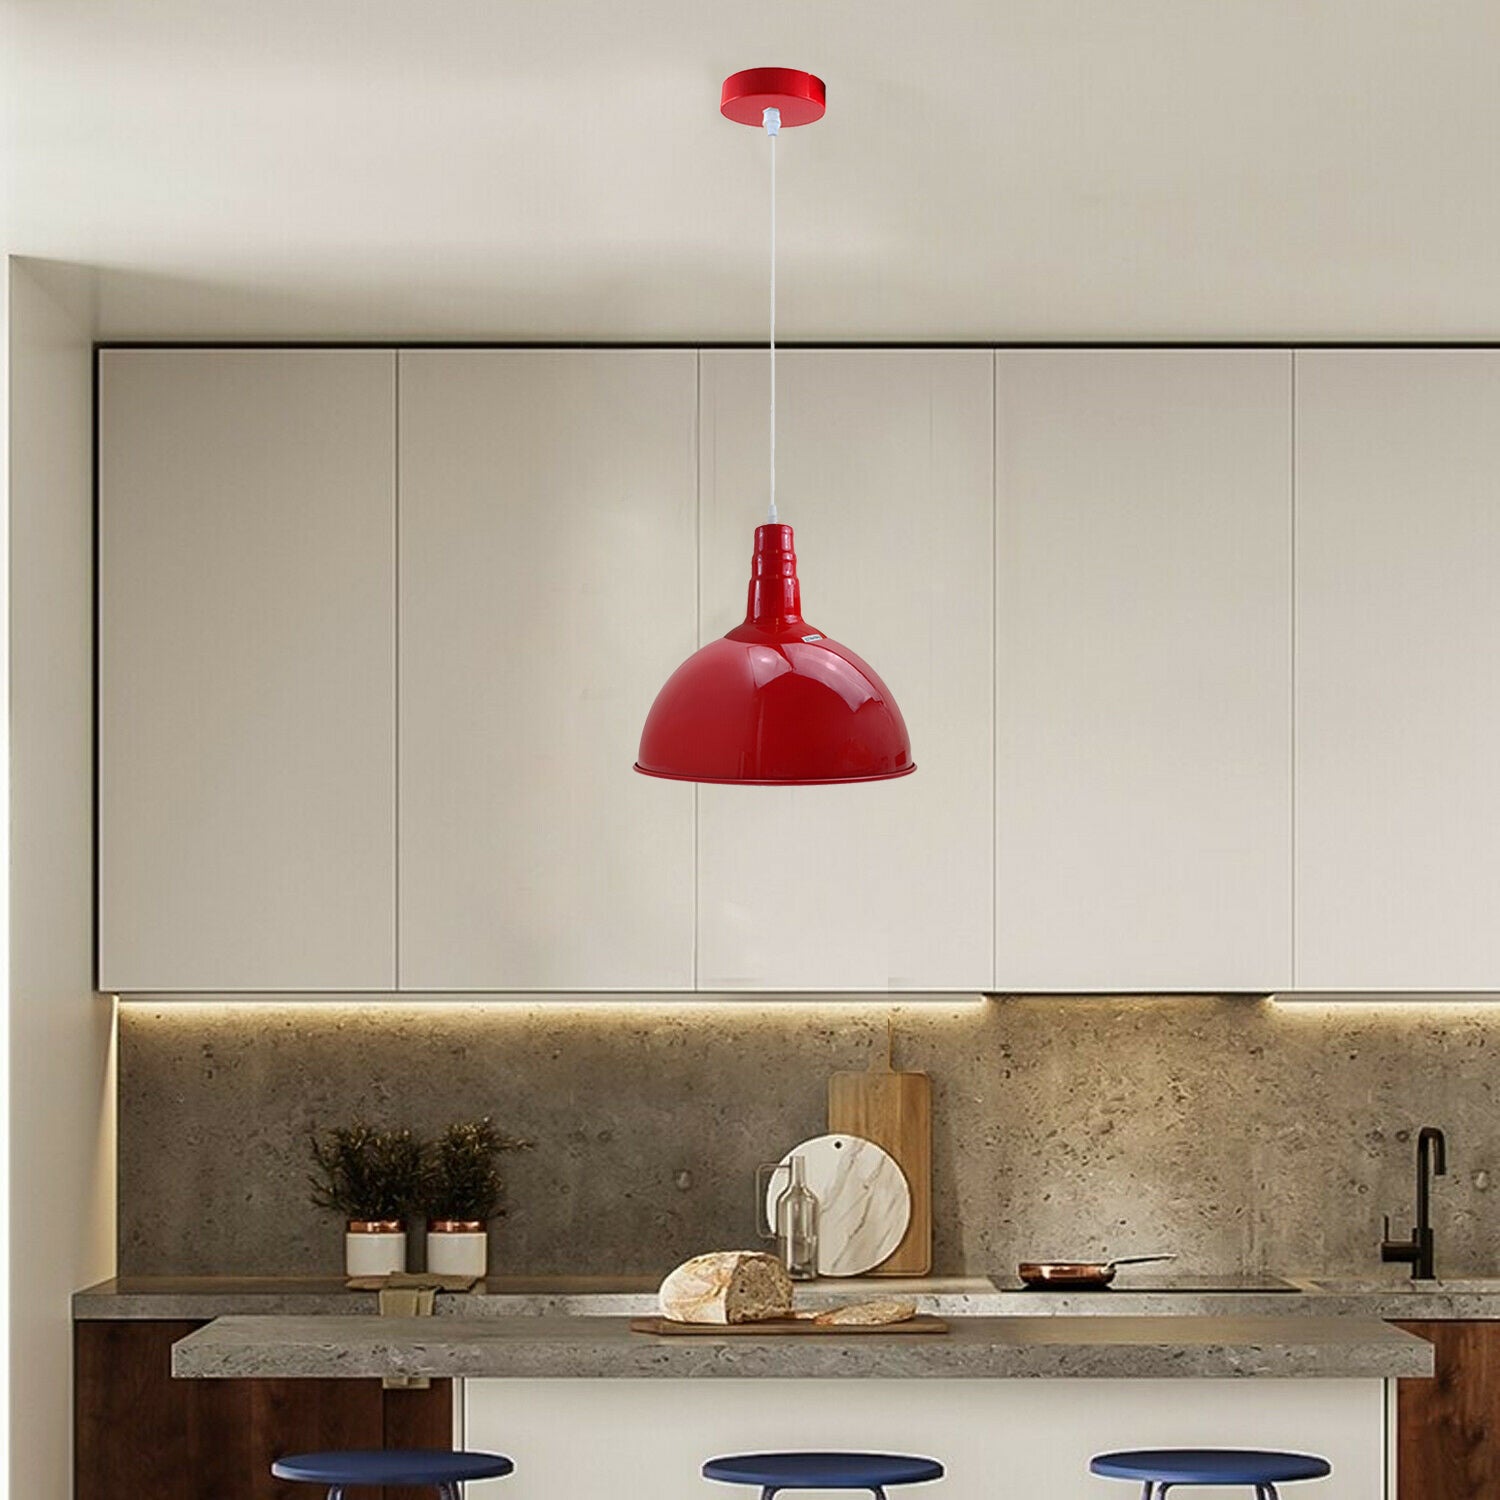 Red Retro Bedroom and Kitchen Pendant Light Shades